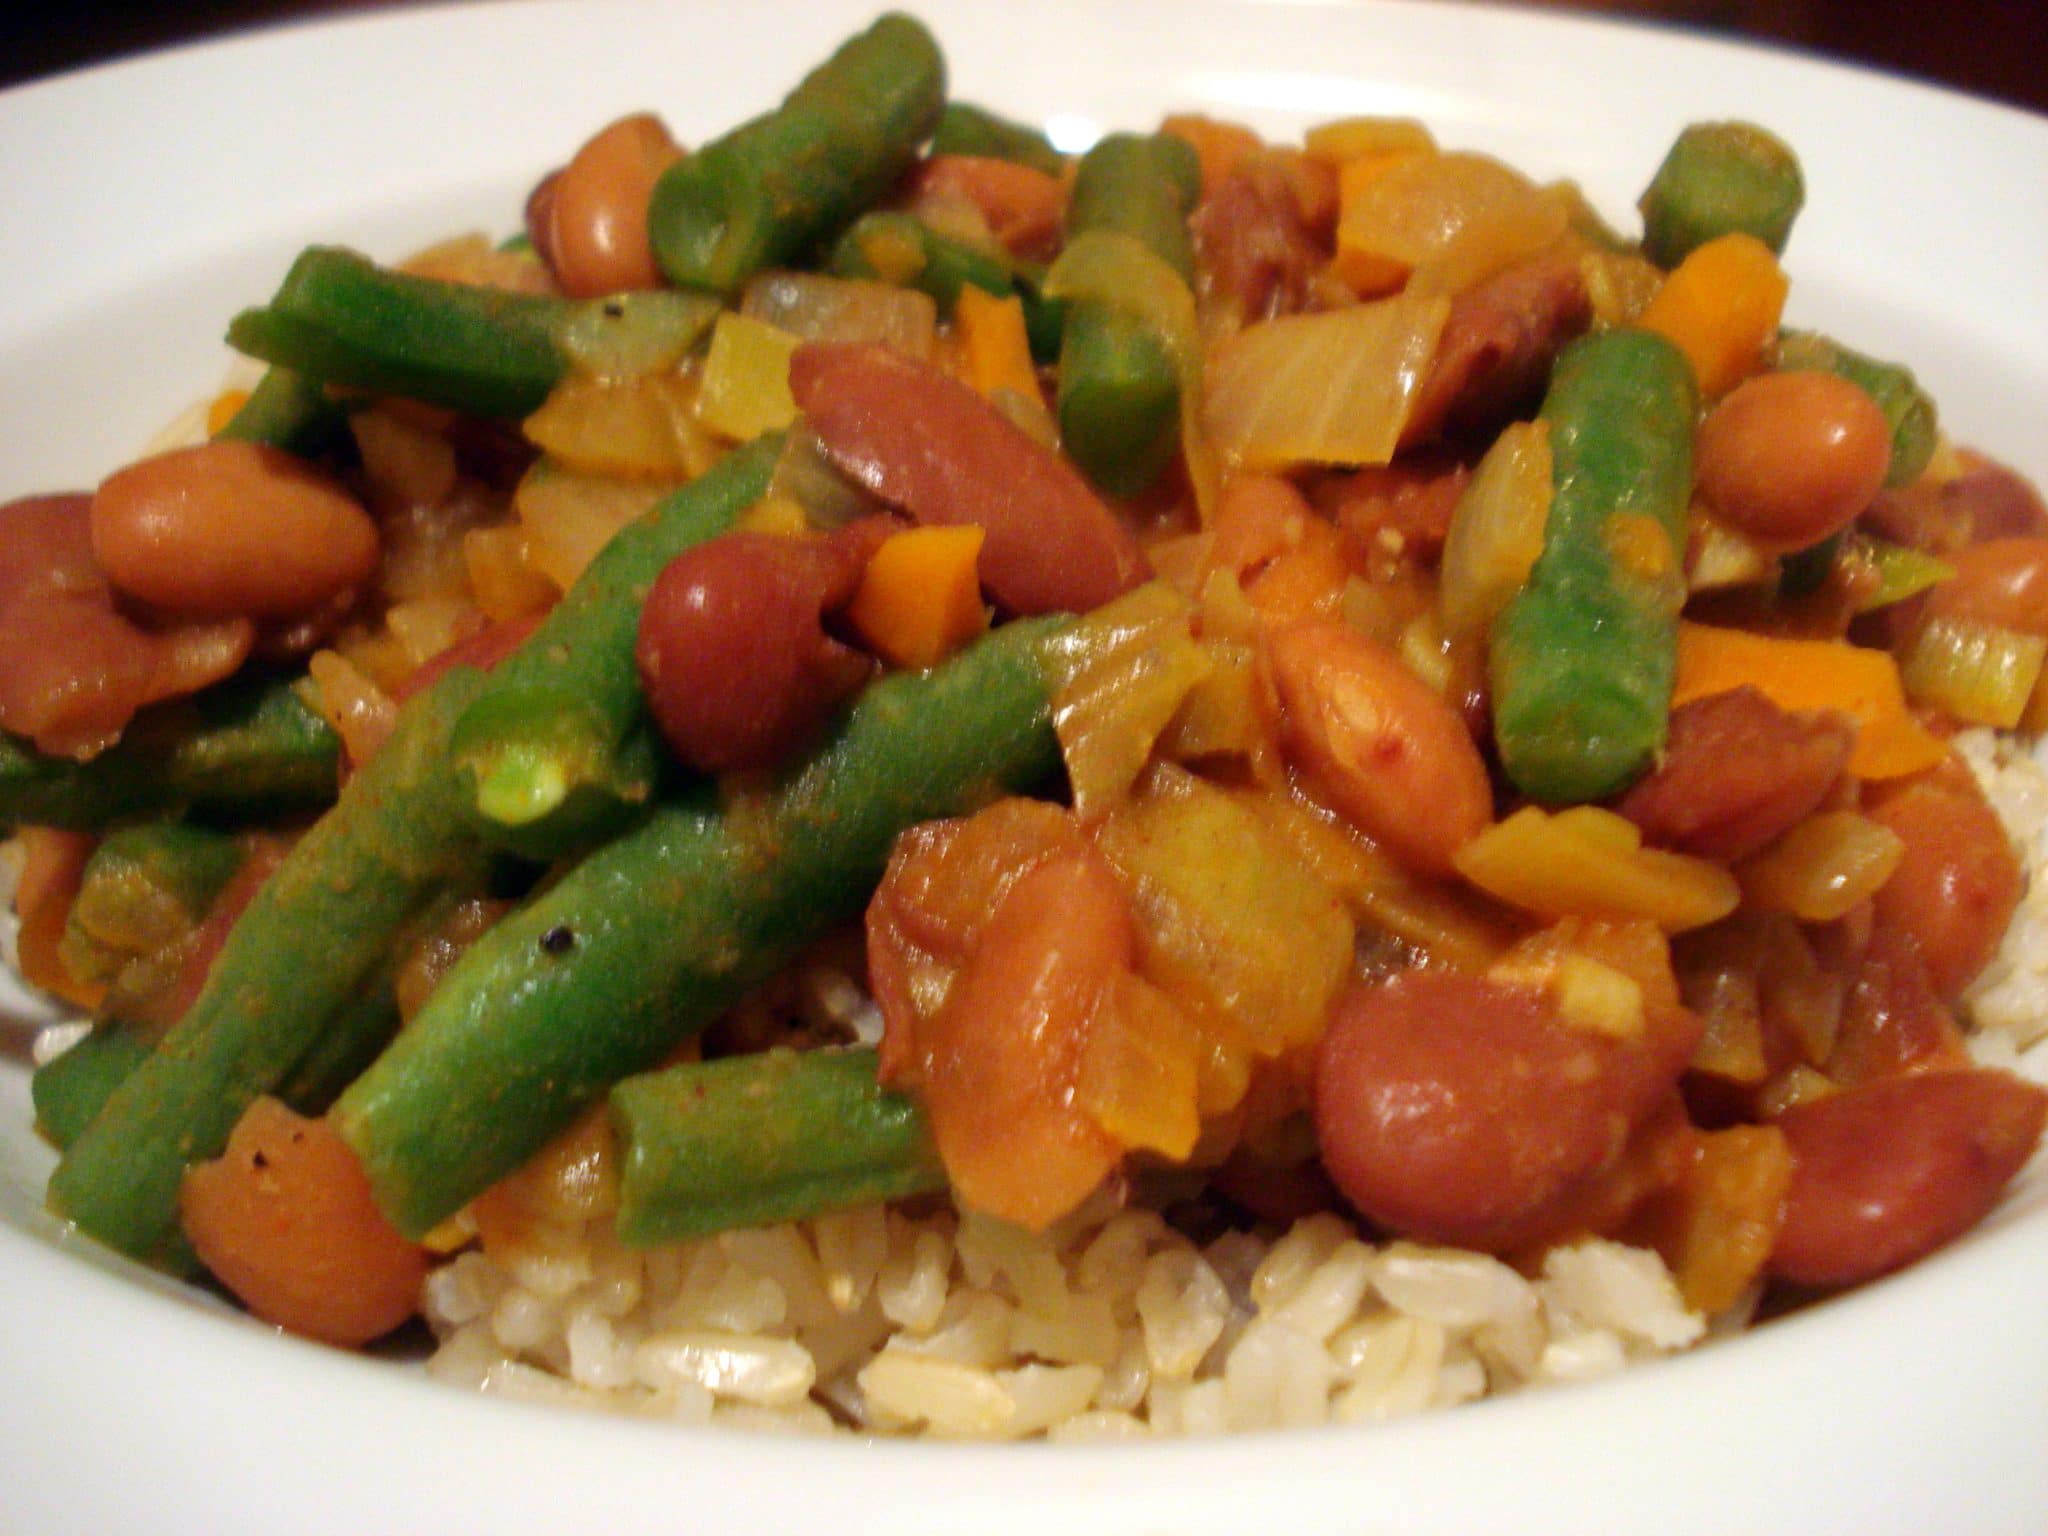 Bean stew with green beans and onions over rice